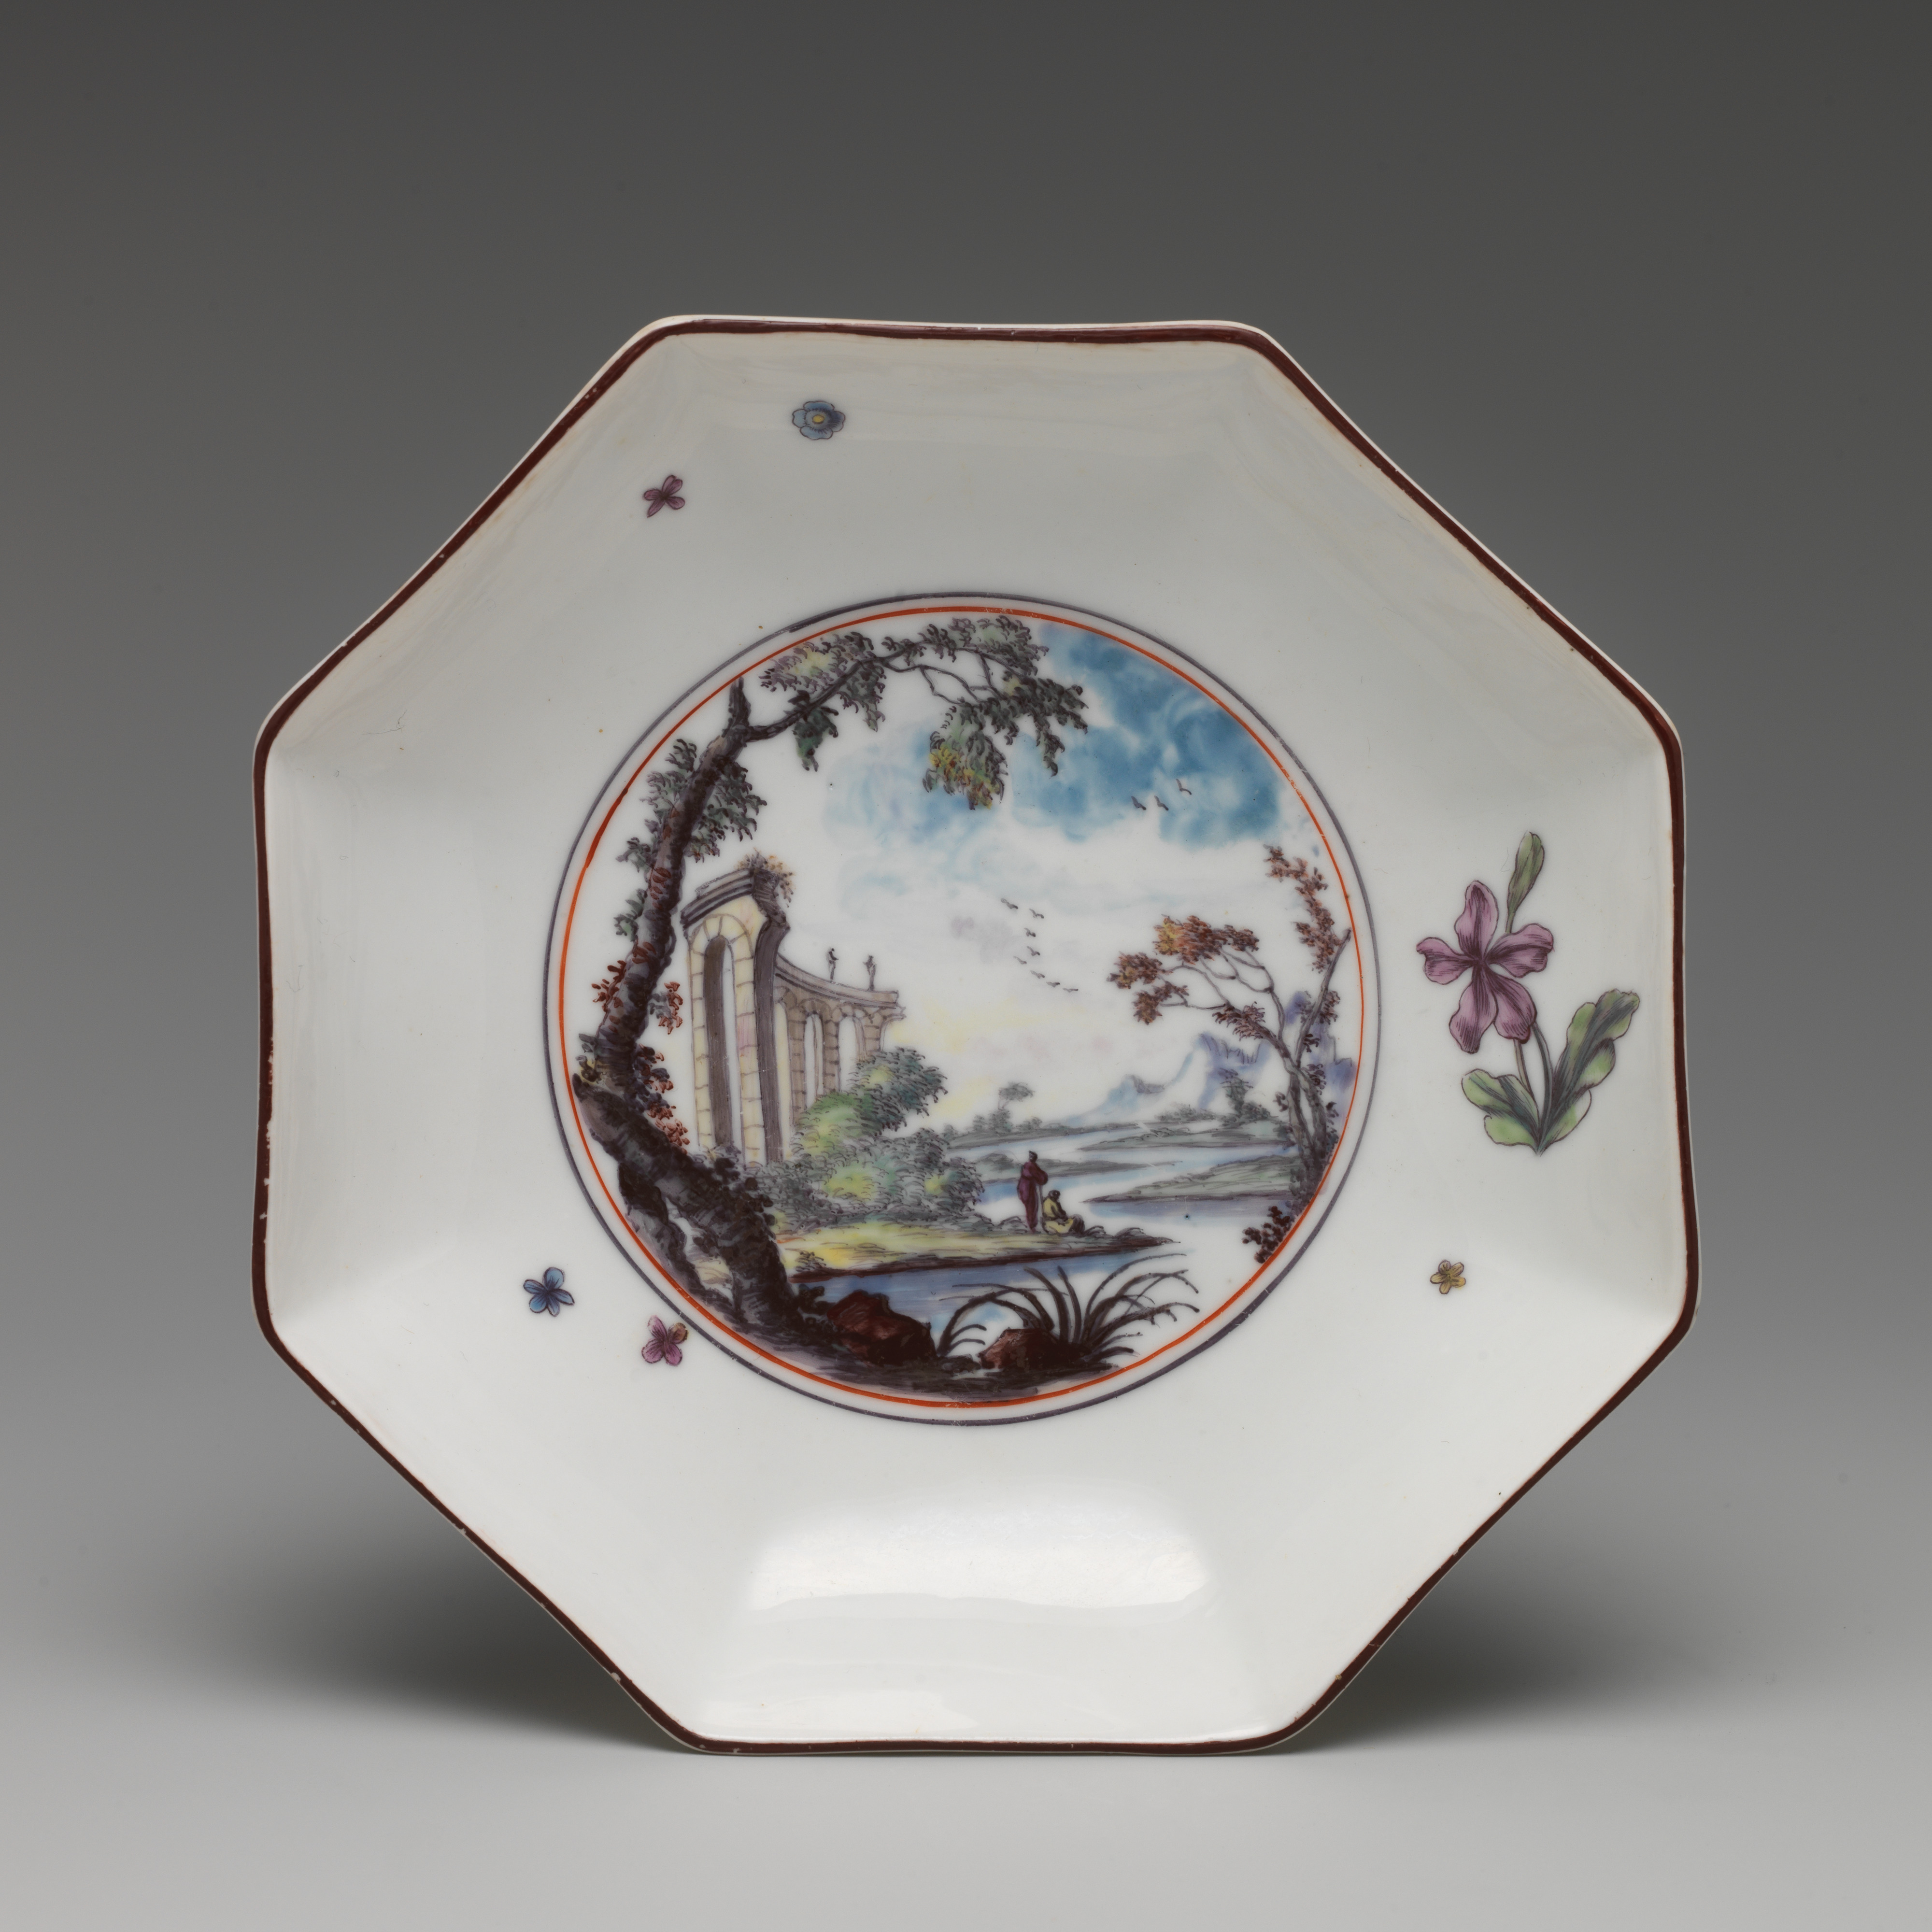 Chelsea Porcelain Manufactory Artworks collected in Metmuseum